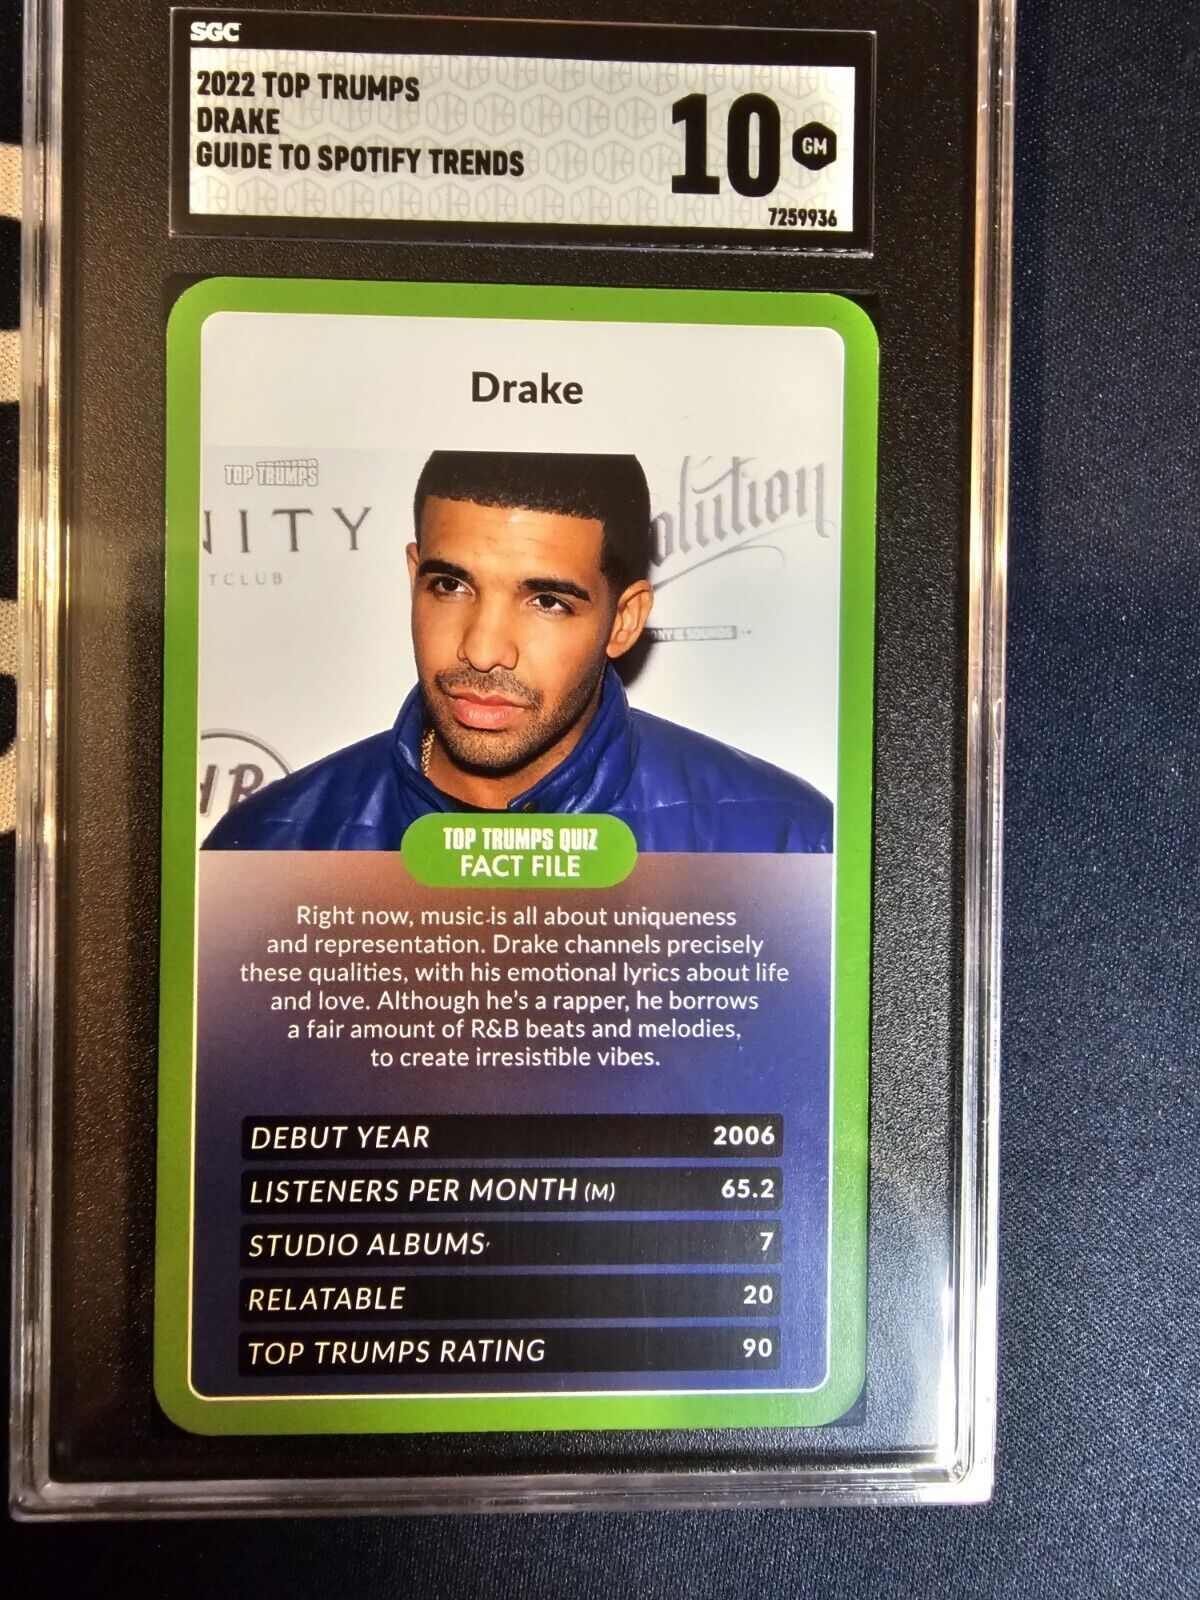 2022 Top Trumps Guide Drake TO Spotify Trends SGC 10 GEM MINT (05)